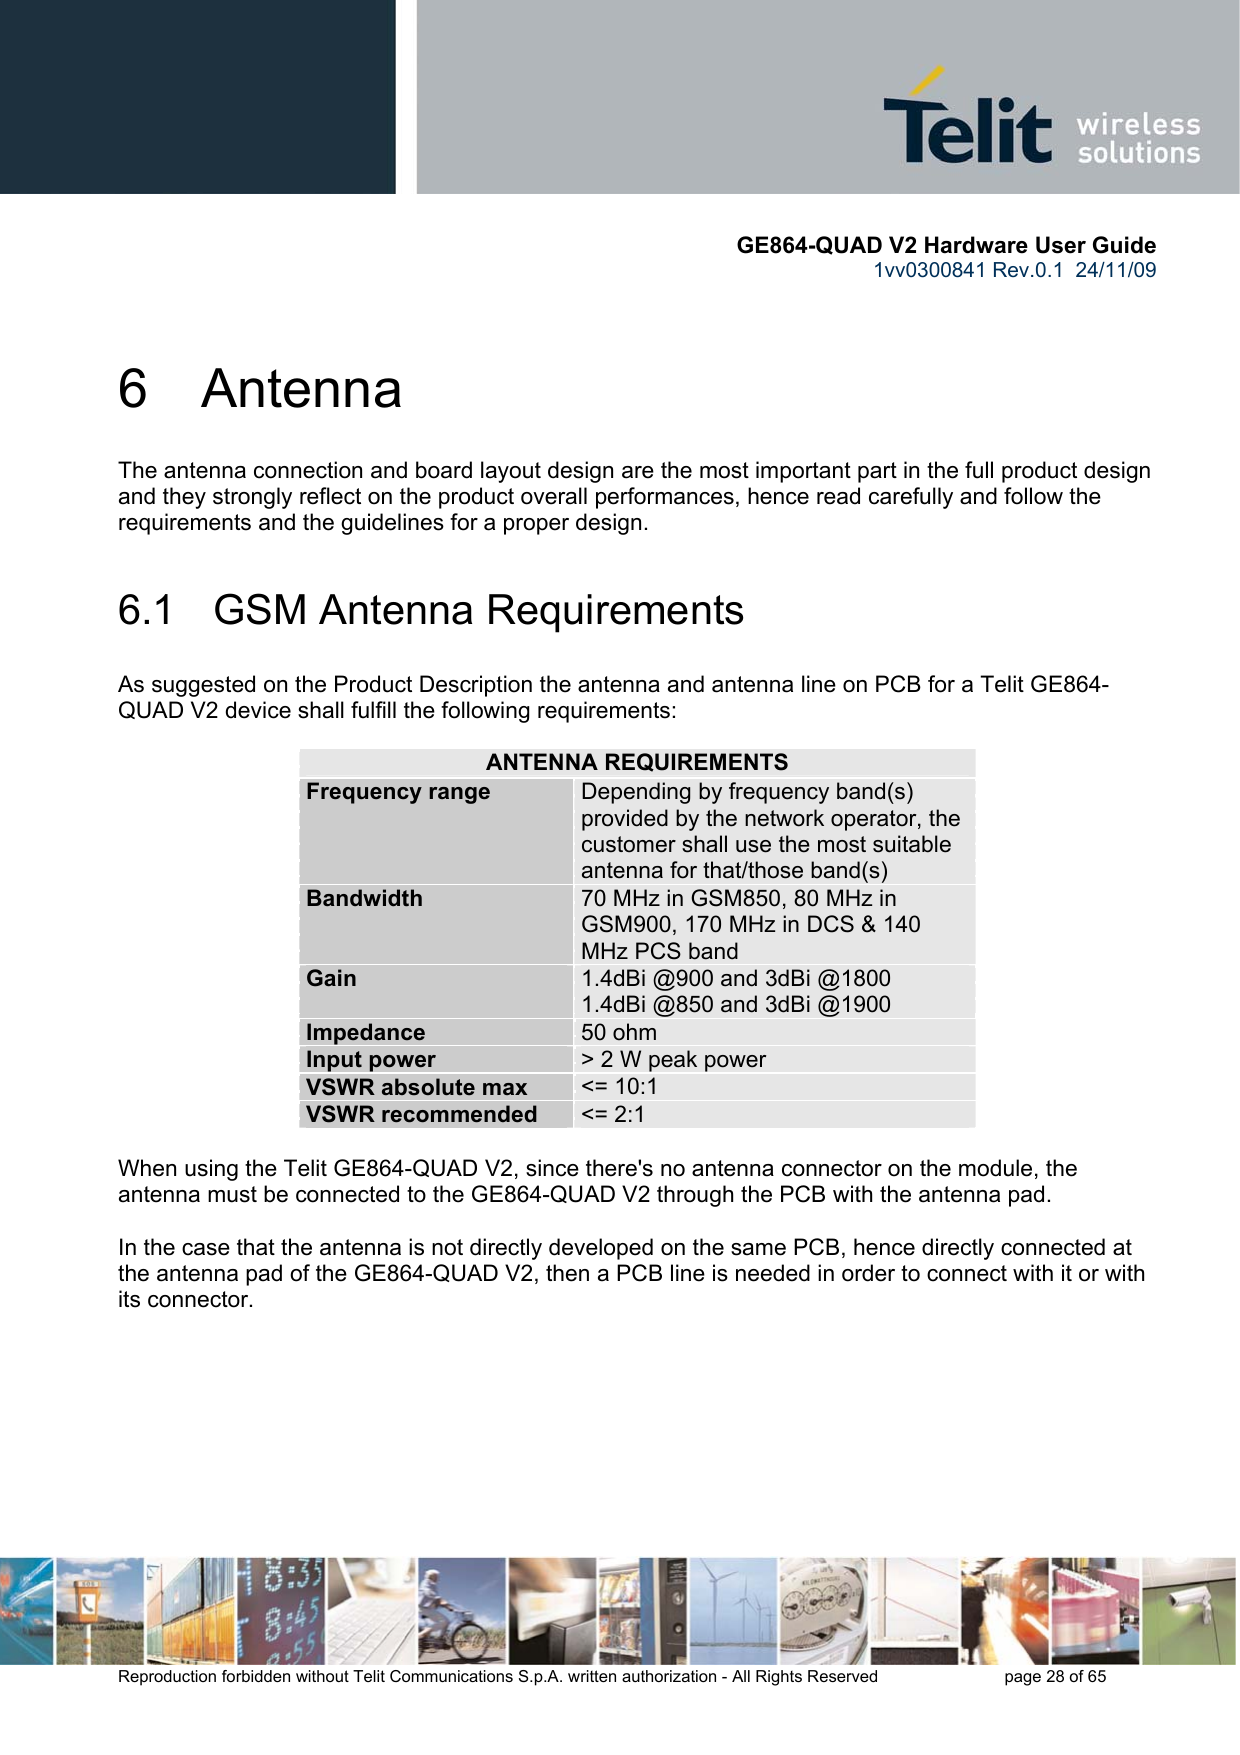       GE864-QUAD V2 Hardware User Guide 1vv0300841 Rev.0.1  24/11/09      Reproduction forbidden without Telit Communications S.p.A. written authorization - All Rights Reserved    page 28 of 65  6  Antenna The antenna connection and board layout design are the most important part in the full product design and they strongly reflect on the product overall performances, hence read carefully and follow the requirements and the guidelines for a proper design. 6.1   GSM Antenna Requirements As suggested on the Product Description the antenna and antenna line on PCB for a Telit GE864-QUAD V2 device shall fulfill the following requirements:   ANTENNA REQUIREMENTS Frequency range  Depending by frequency band(s) provided by the network operator, the customer shall use the most suitable antenna for that/those band(s) Bandwidth  70 MHz in GSM850, 80 MHz in GSM900, 170 MHz in DCS &amp; 140 MHz PCS band Gain  1.4dBi @900 and 3dBi @1800 1.4dBi @850 and 3dBi @1900 Impedance  50 ohm Input power  &gt; 2 W peak power VSWR absolute max  &lt;= 10:1 VSWR recommended  &lt;= 2:1  When using the Telit GE864-QUAD V2, since there&apos;s no antenna connector on the module, the antenna must be connected to the GE864-QUAD V2 through the PCB with the antenna pad.  In the case that the antenna is not directly developed on the same PCB, hence directly connected at the antenna pad of the GE864-QUAD V2, then a PCB line is needed in order to connect with it or with its connector.   